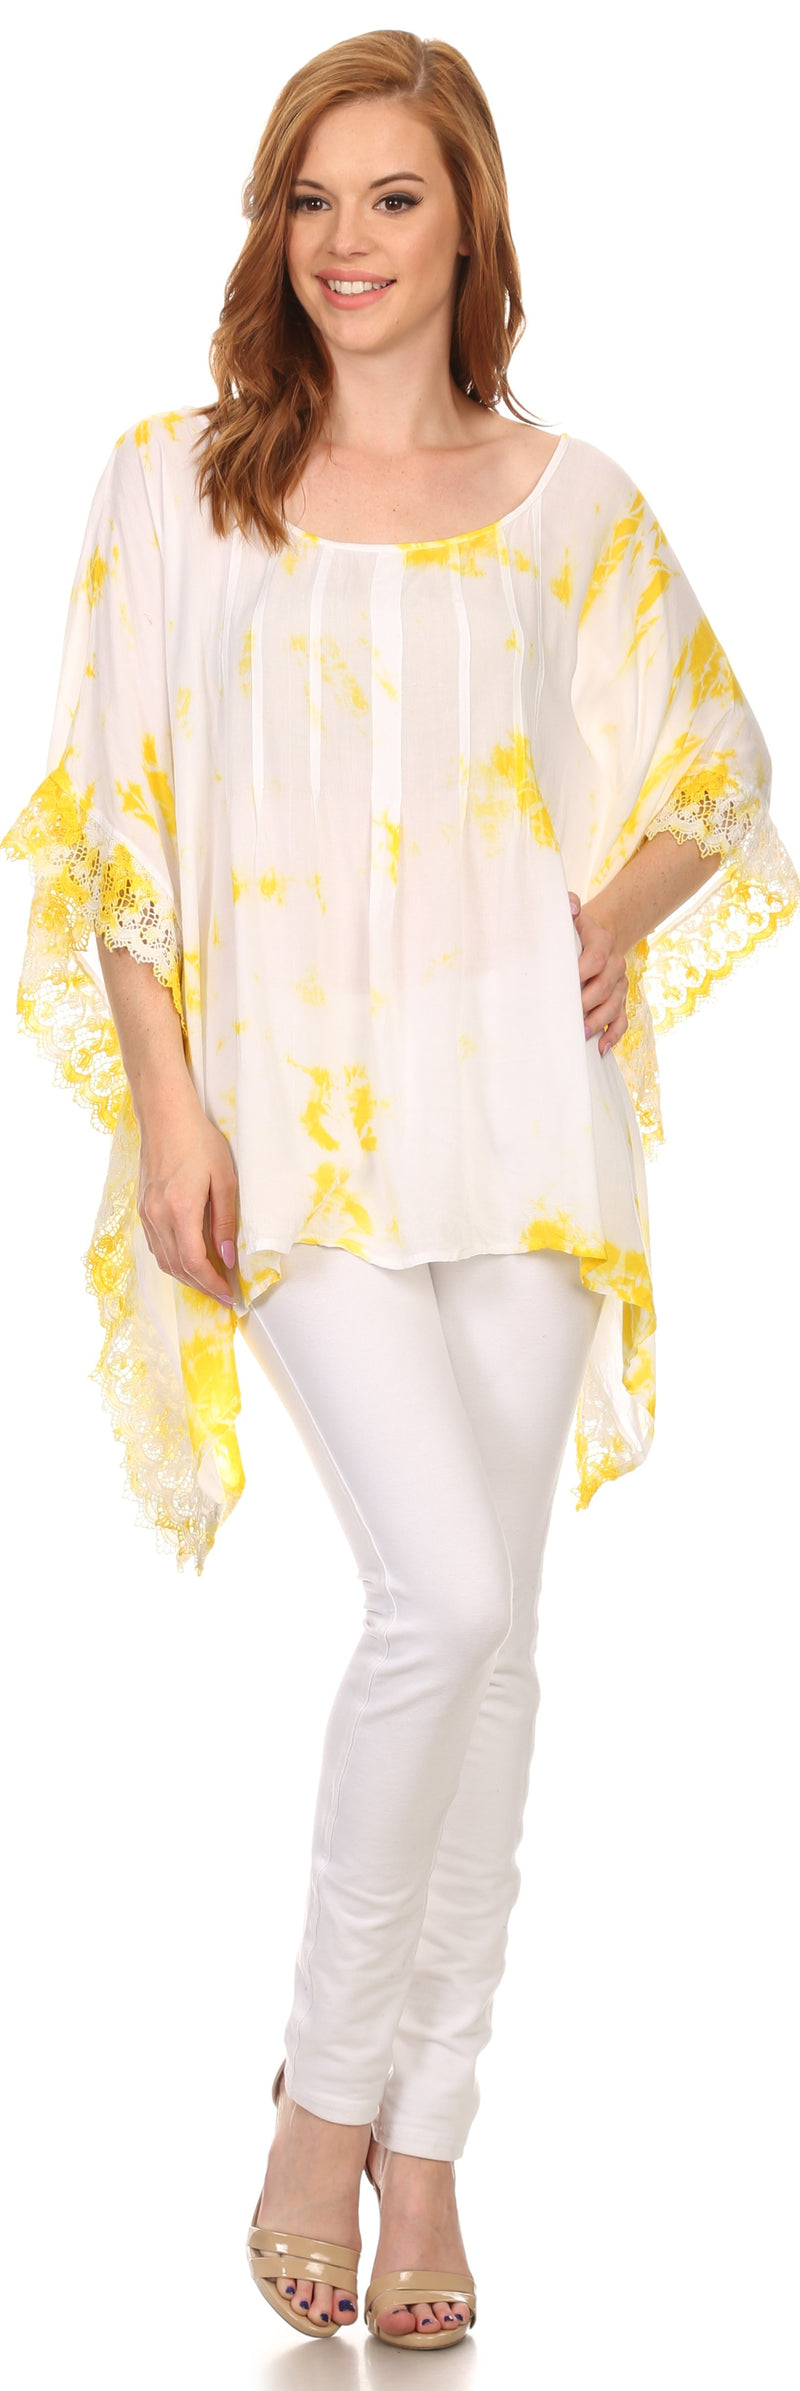 Sakkas Wayl Long Tall Wide Lace Embroidered Tie Dye Square Boxy Poncho Top Blouse